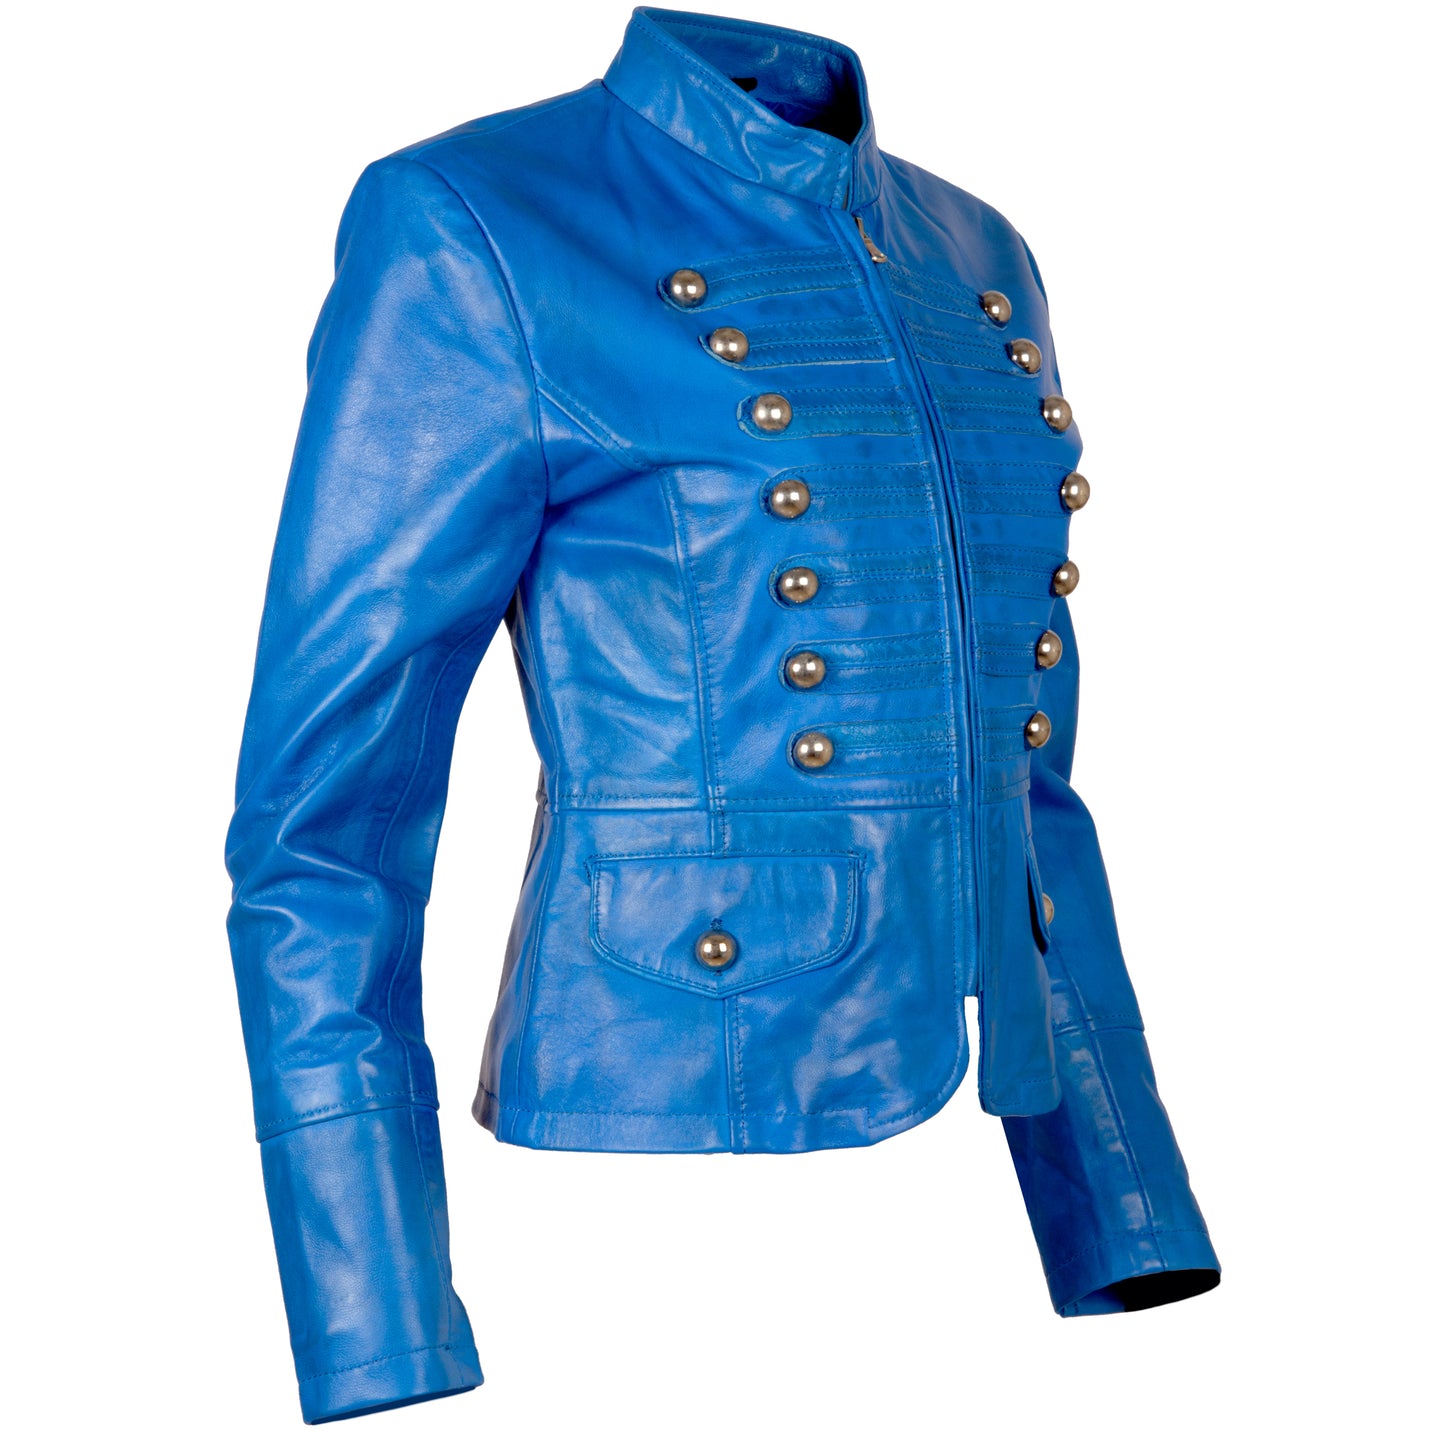 T5J4 Women’s Military Parade Jacket - Electric Blue